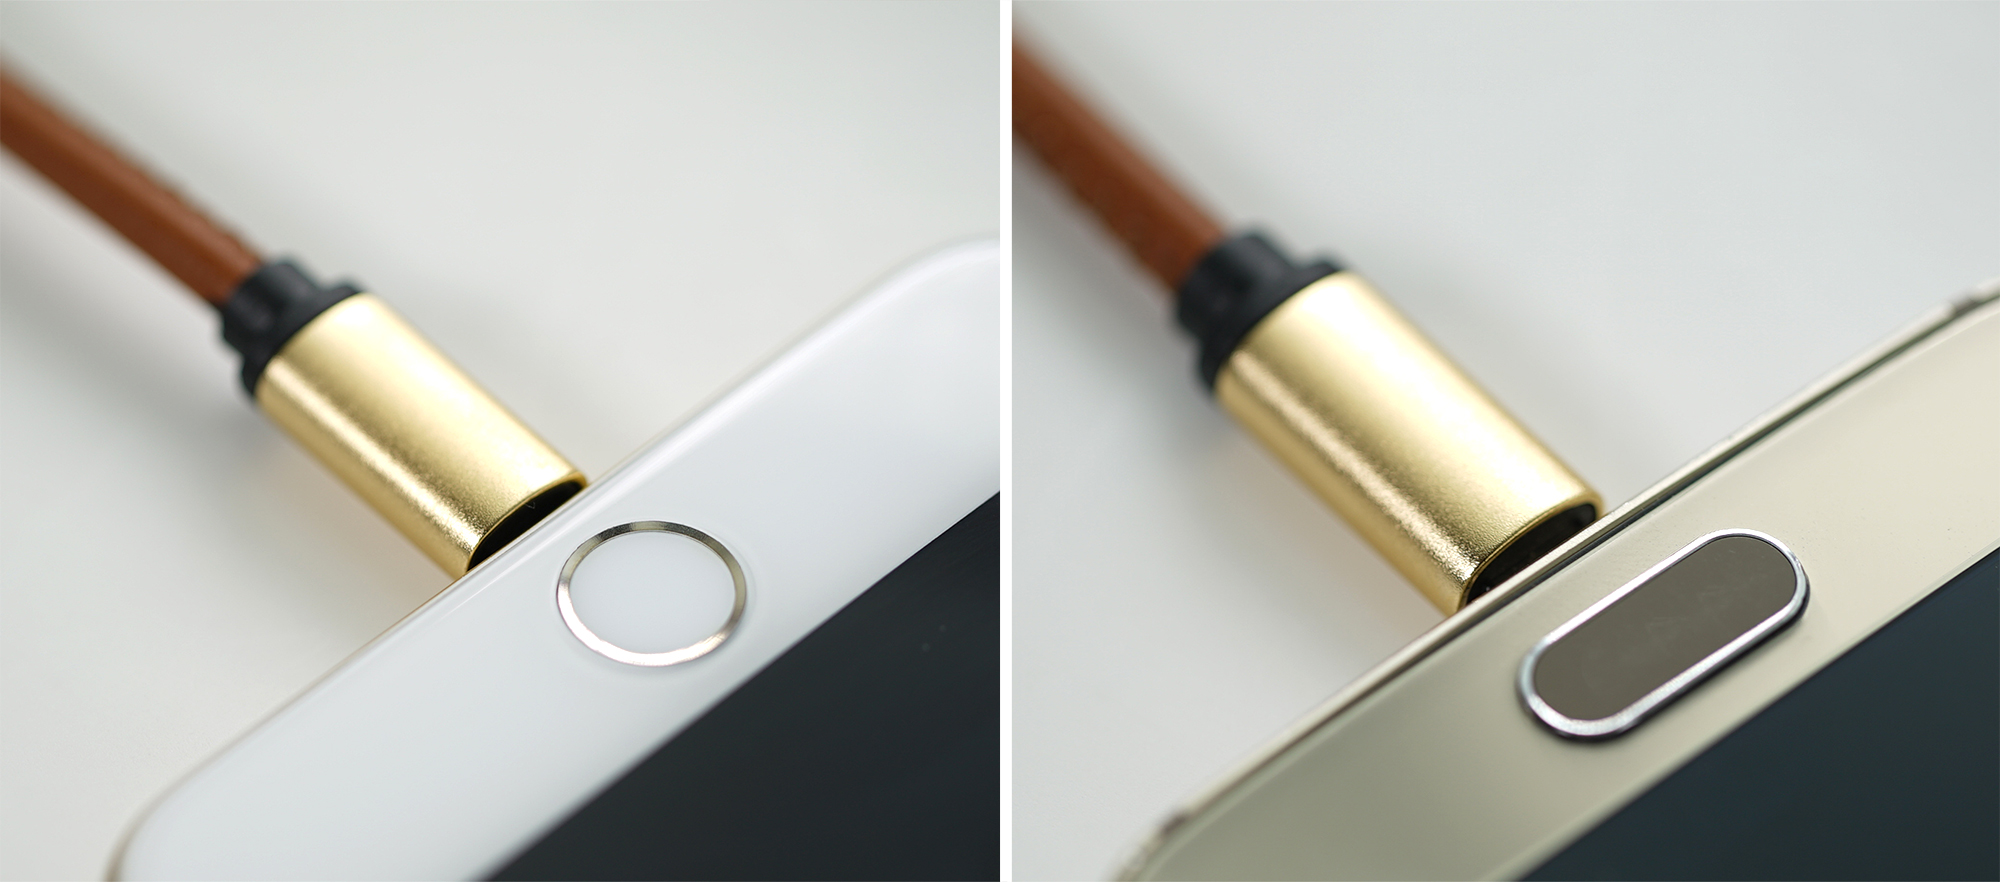 Genius Charging Cable Works On Both iOS And Android Devices At The Same Time